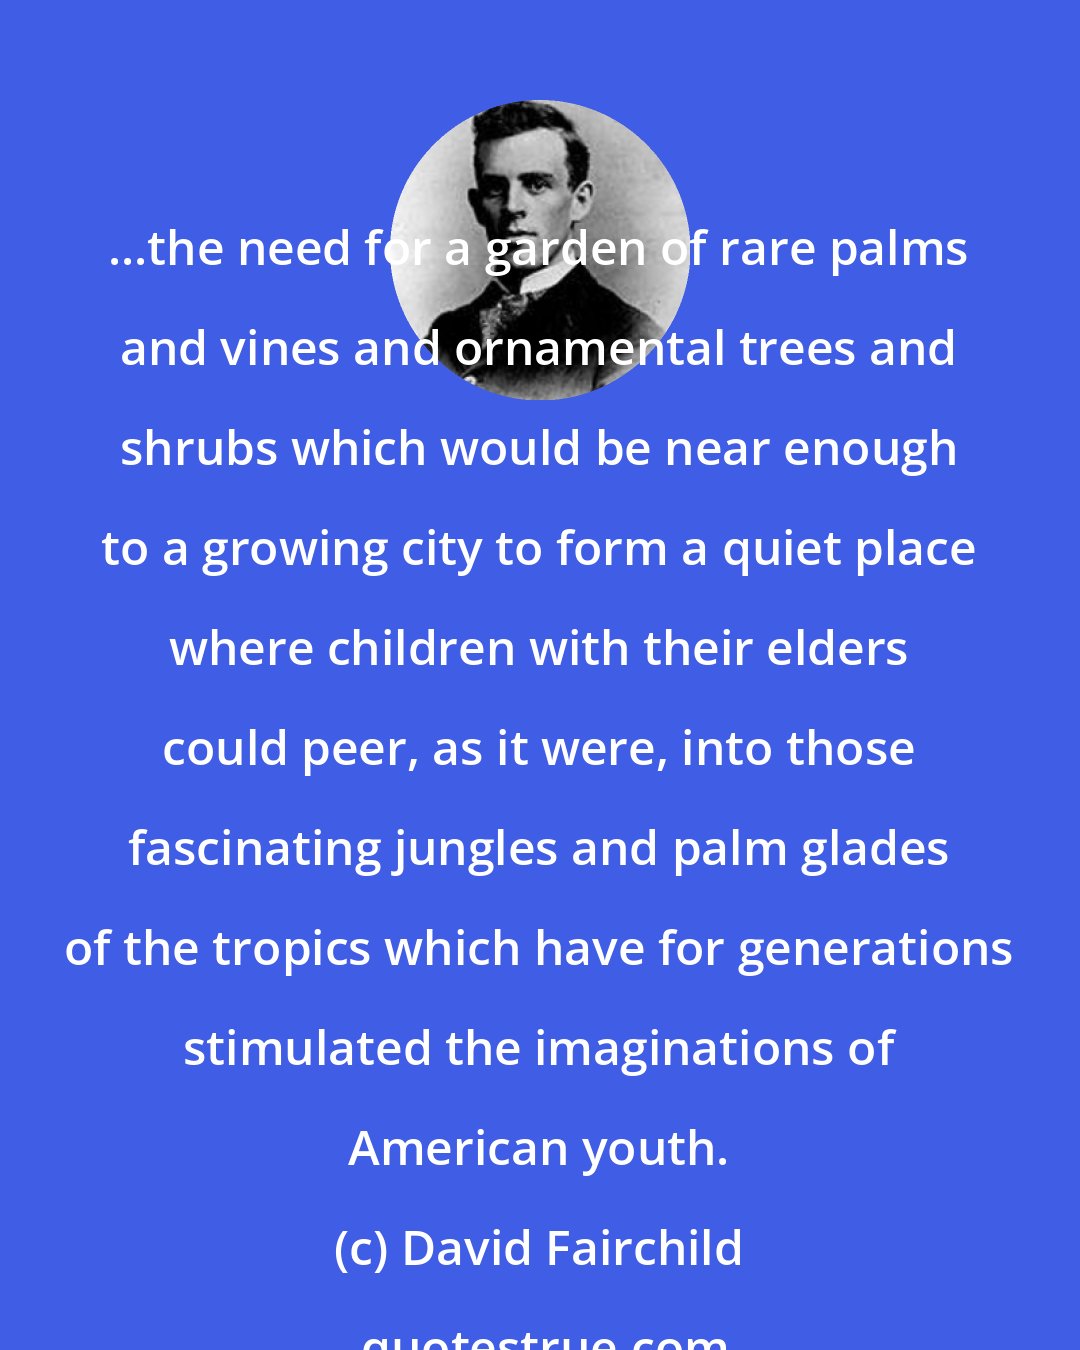 David Fairchild: ...the need for a garden of rare palms and vines and ornamental trees and shrubs which would be near enough to a growing city to form a quiet place where children with their elders could peer, as it were, into those fascinating jungles and palm glades of the tropics which have for generations stimulated the imaginations of American youth.